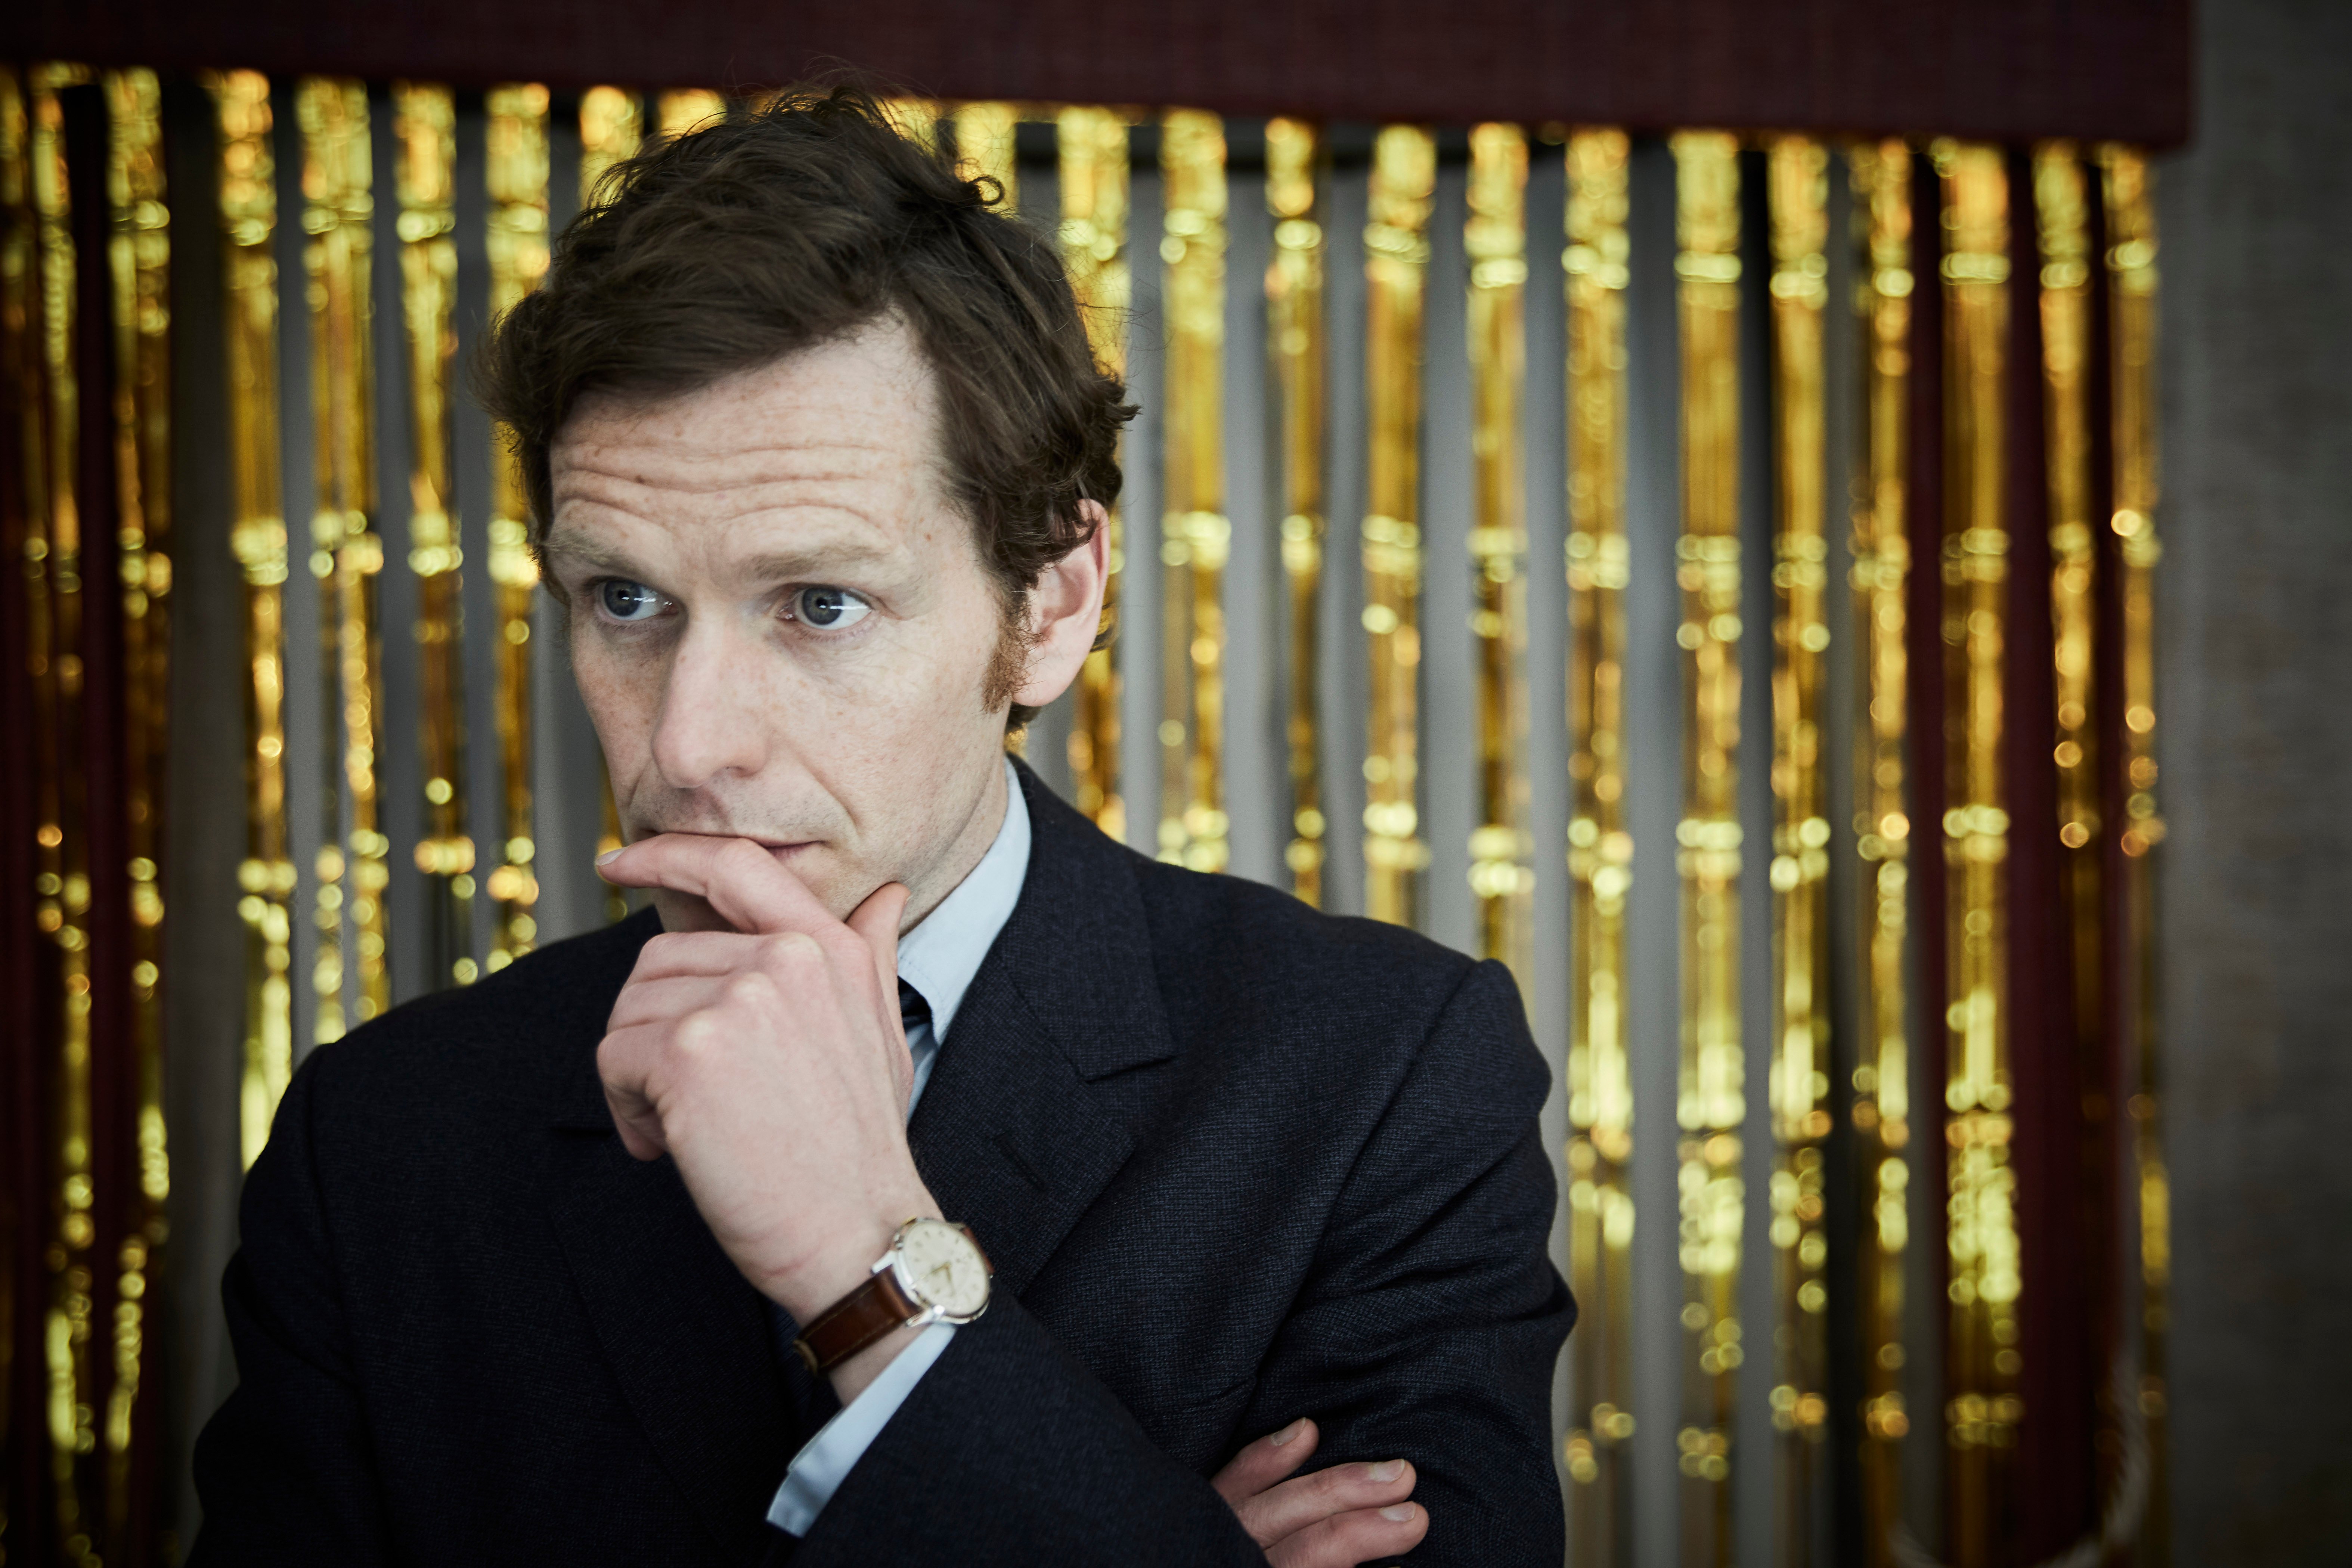 Shaun Evans as Endeavour Morse with his hand on his chin in 'Endeavour' Season 8 on PBS